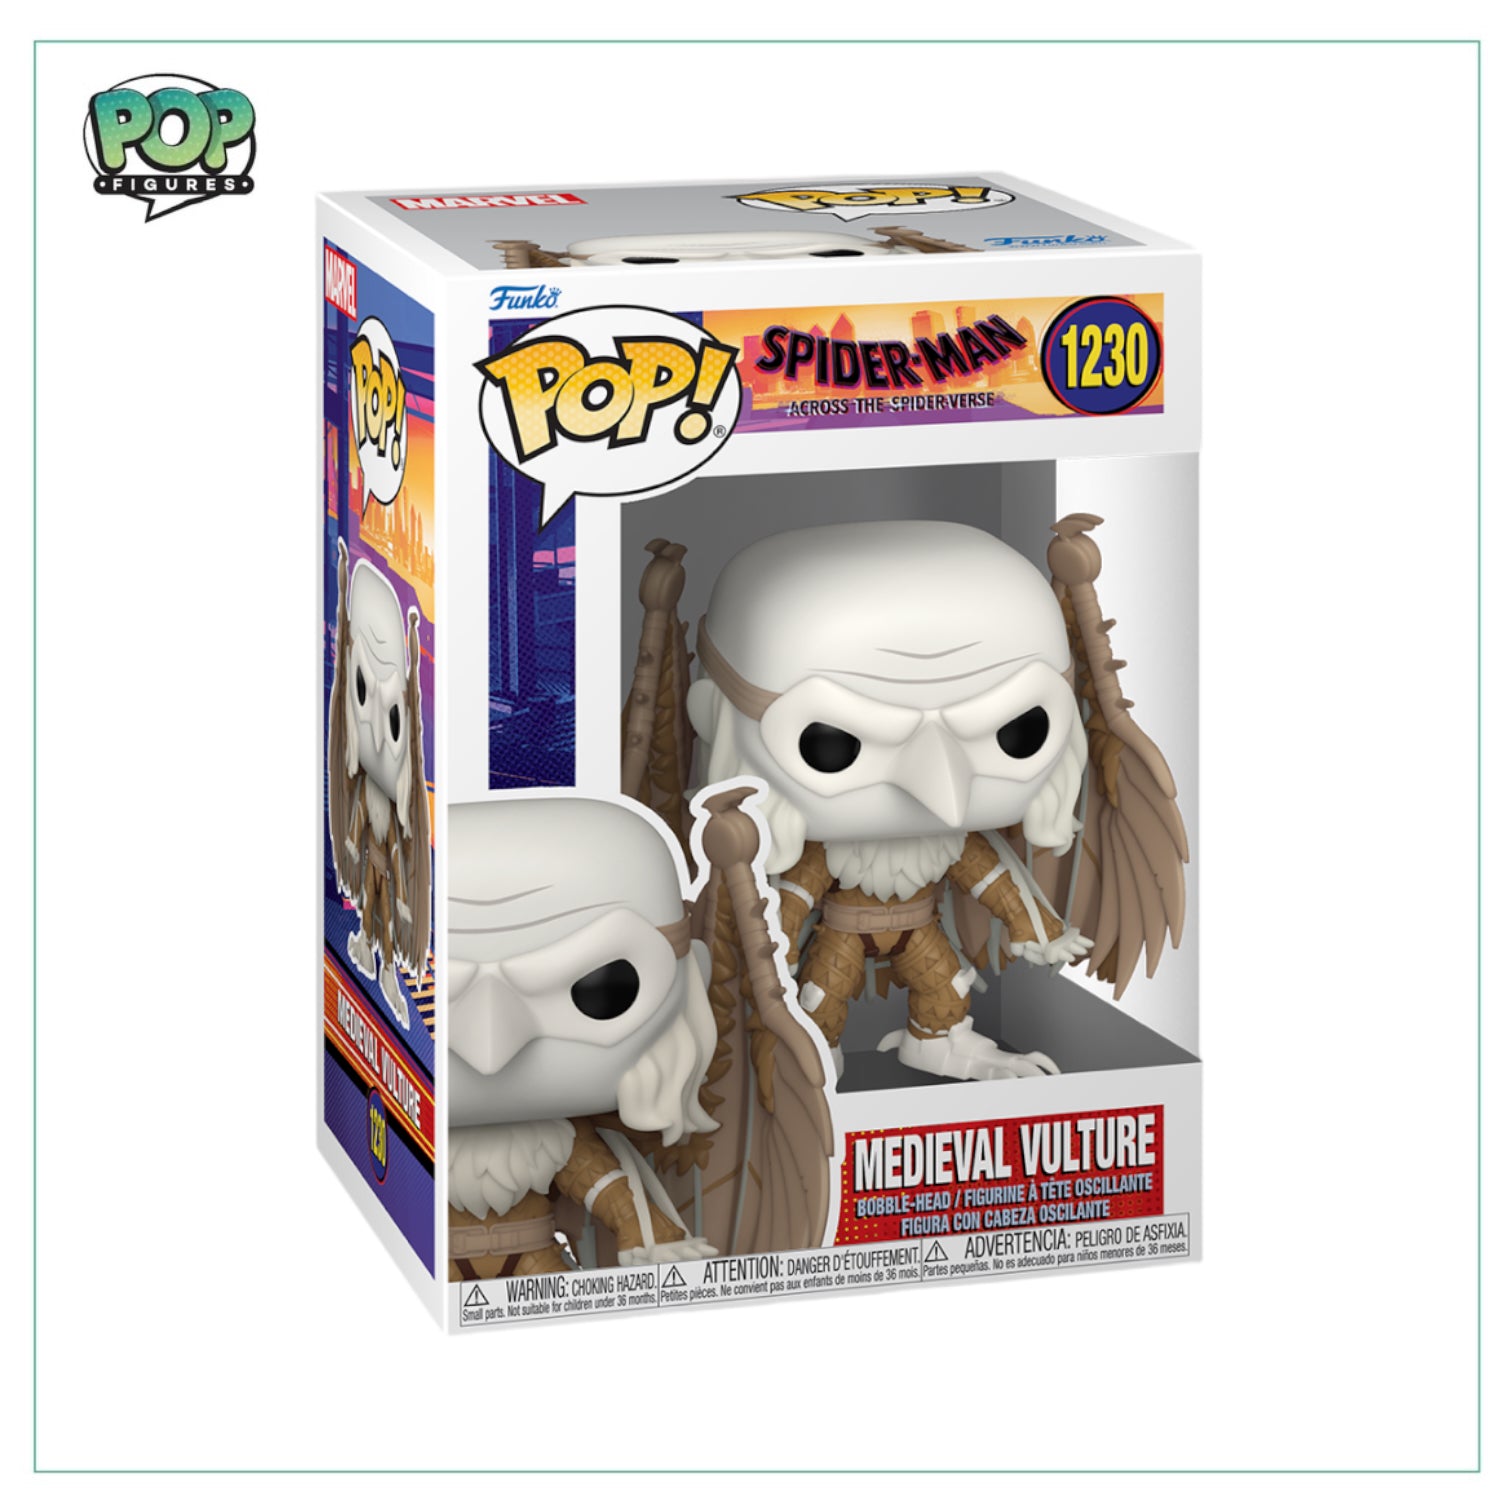 Medieval Vulture #1230 Funko Pop! Spider-Man across the Spiderverse